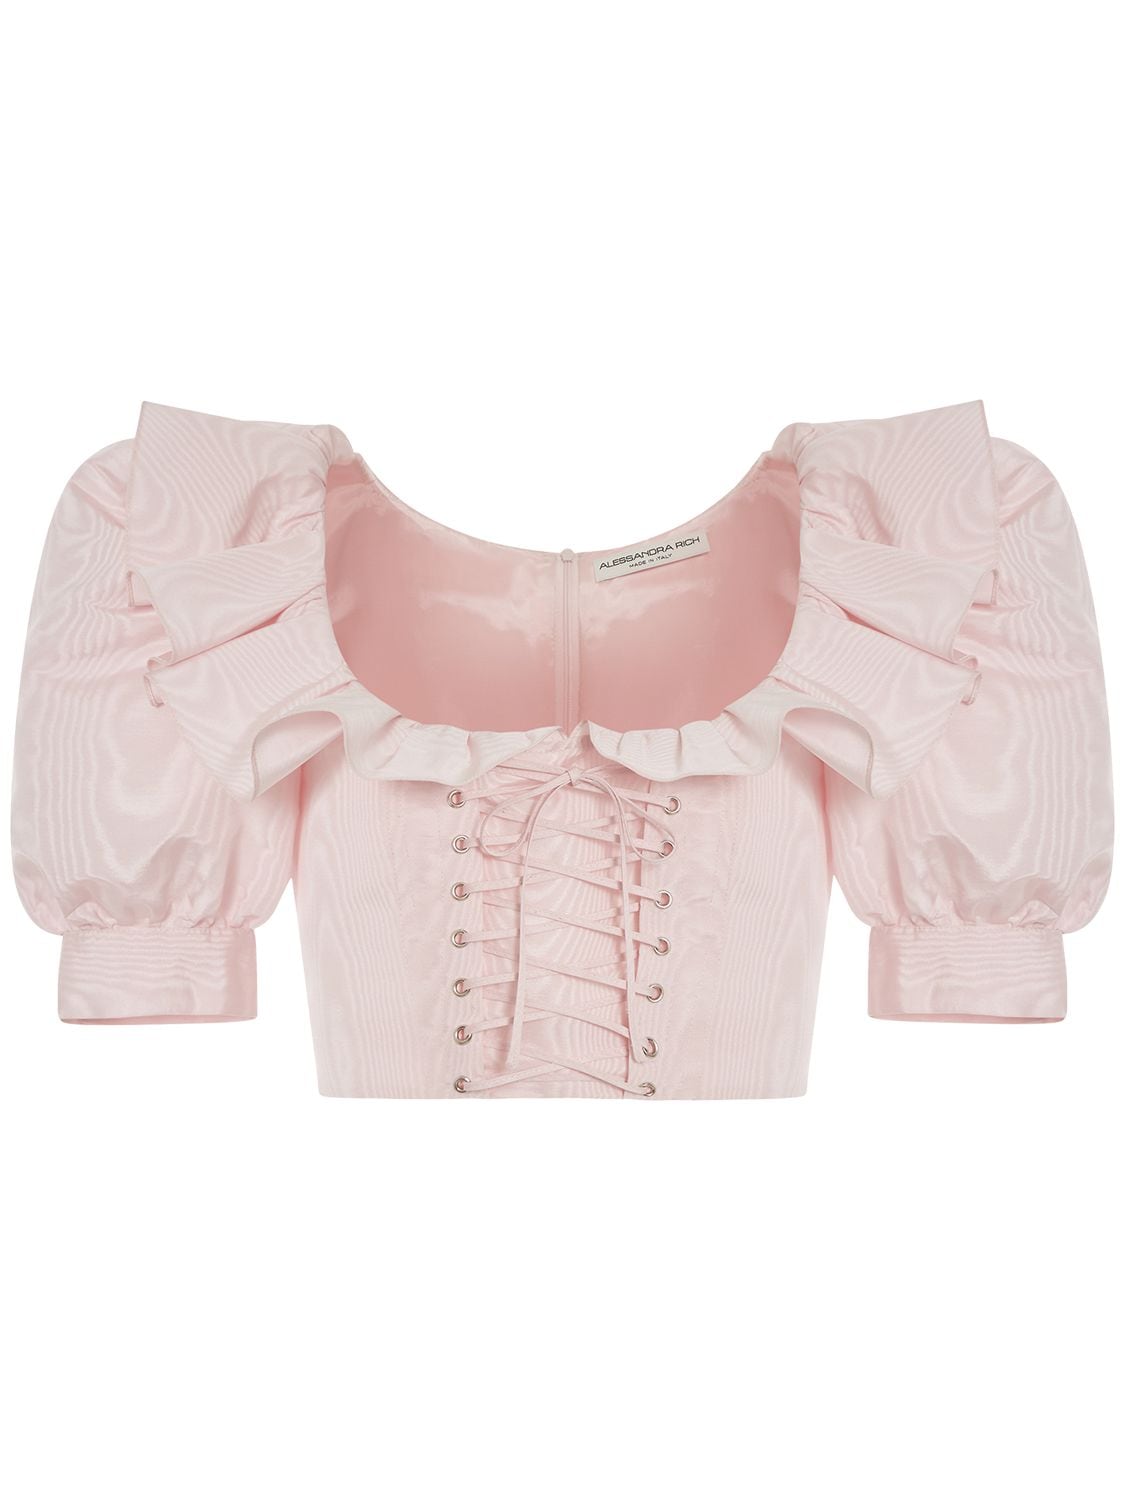 Alessandra Rich Ruffled Moiré Crop Top W/ Lace Up In Pink